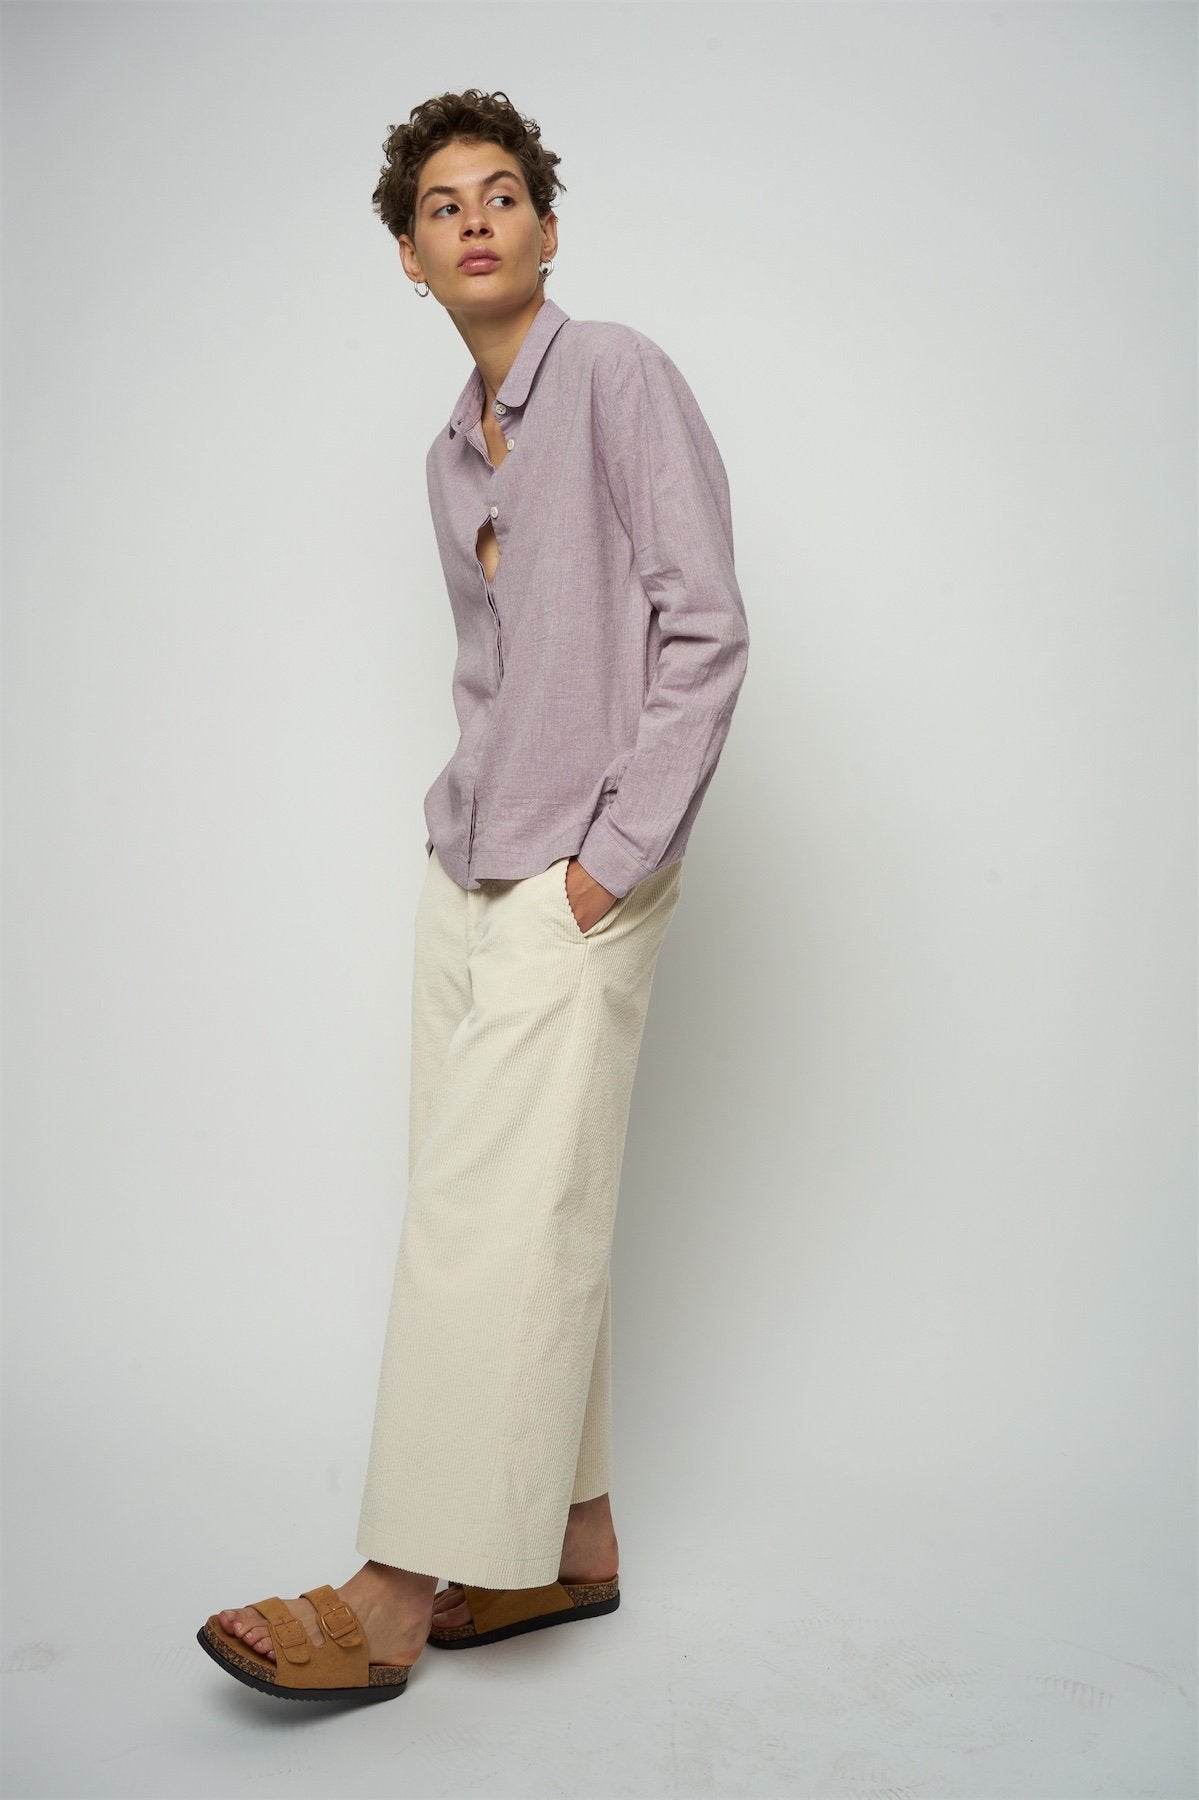 Cute Round Collar Shirt in a Purple Heather Japanese Organic Cotton and Linen